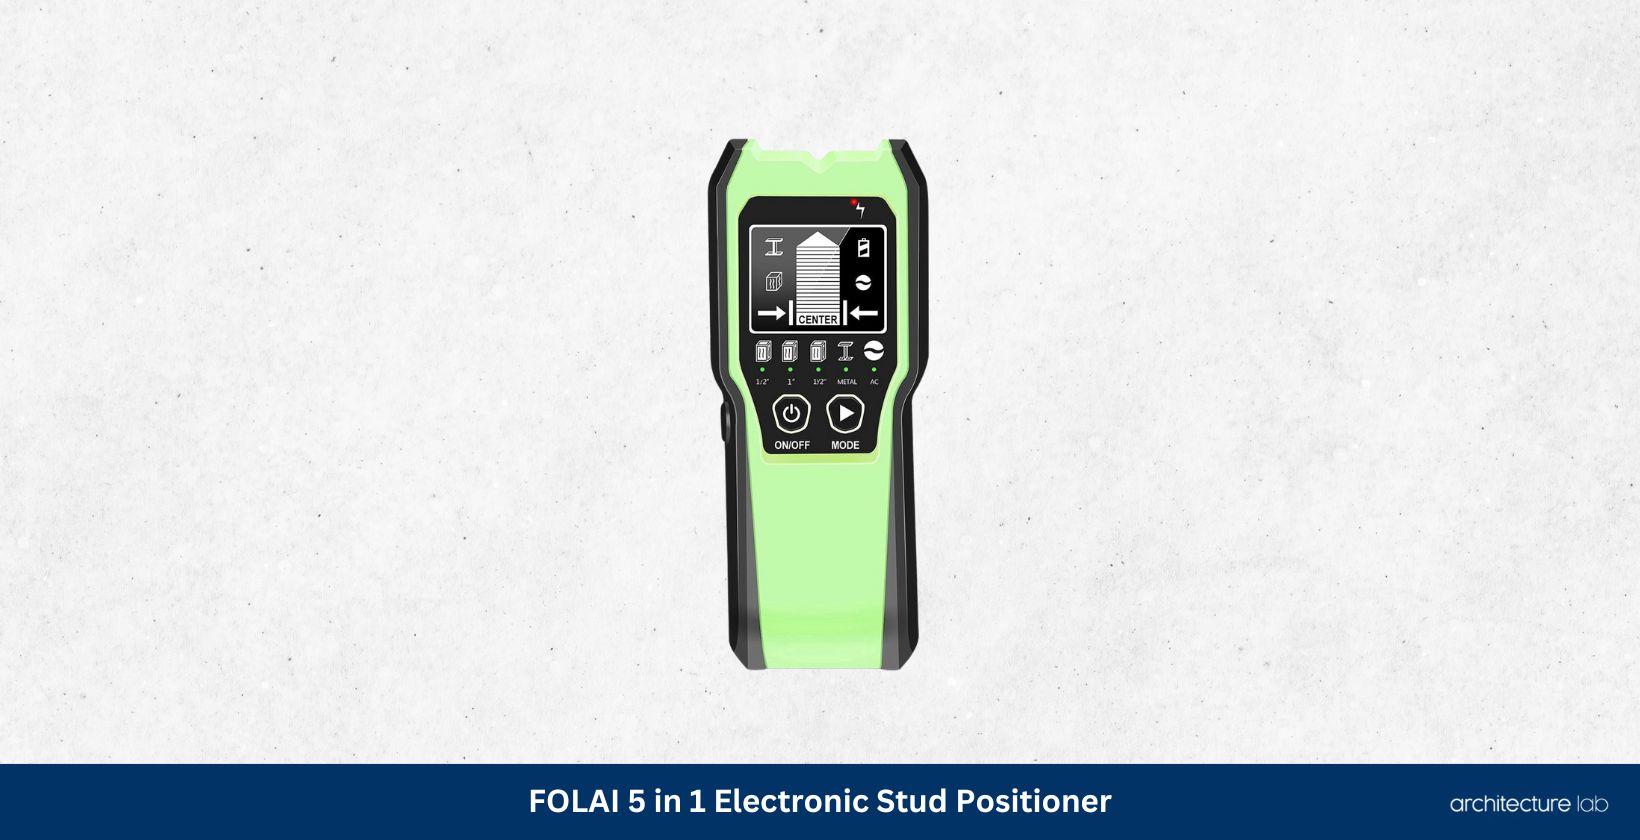 Folai 5 in 1 electronic stud positioner